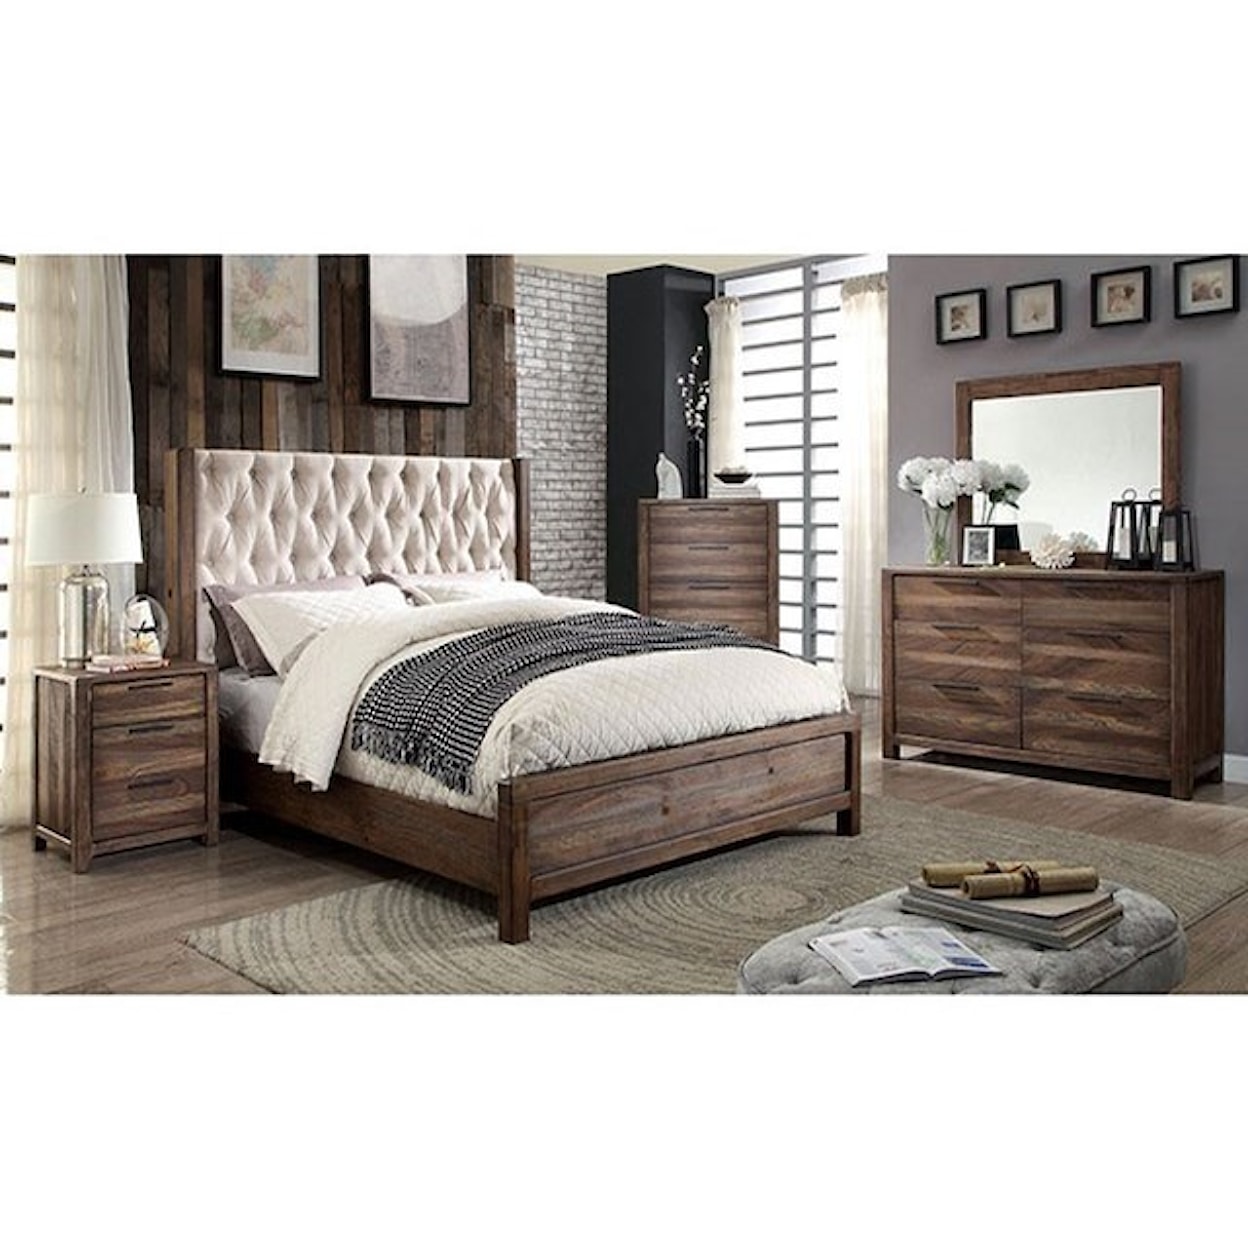 Furniture of America Hutchinson Cal.King Bed